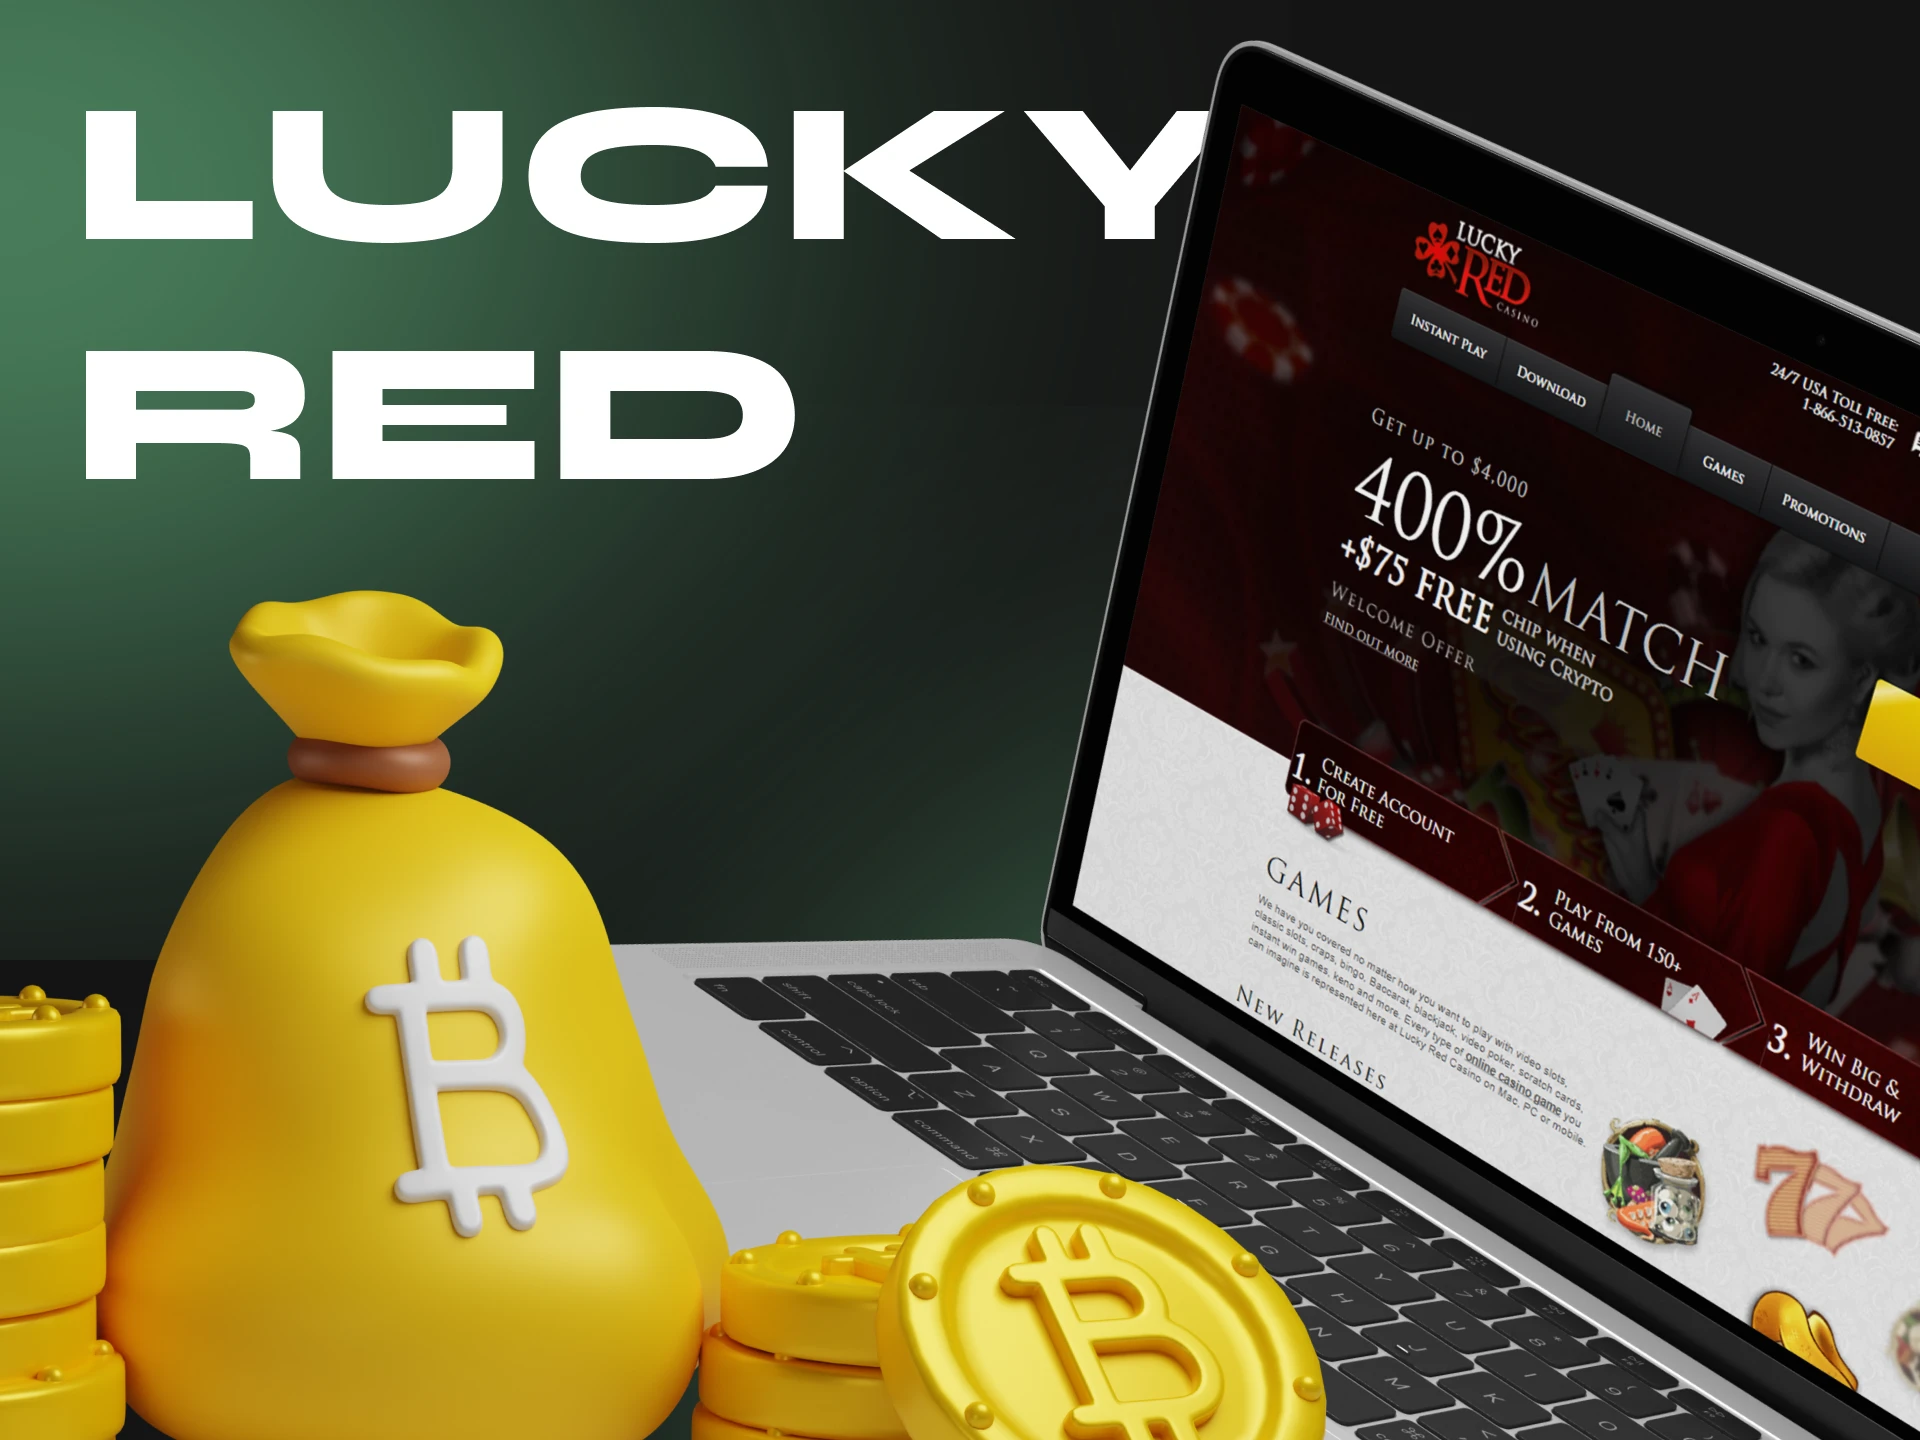 If you like to play casino games using Bitcoin, try LuckyRed.